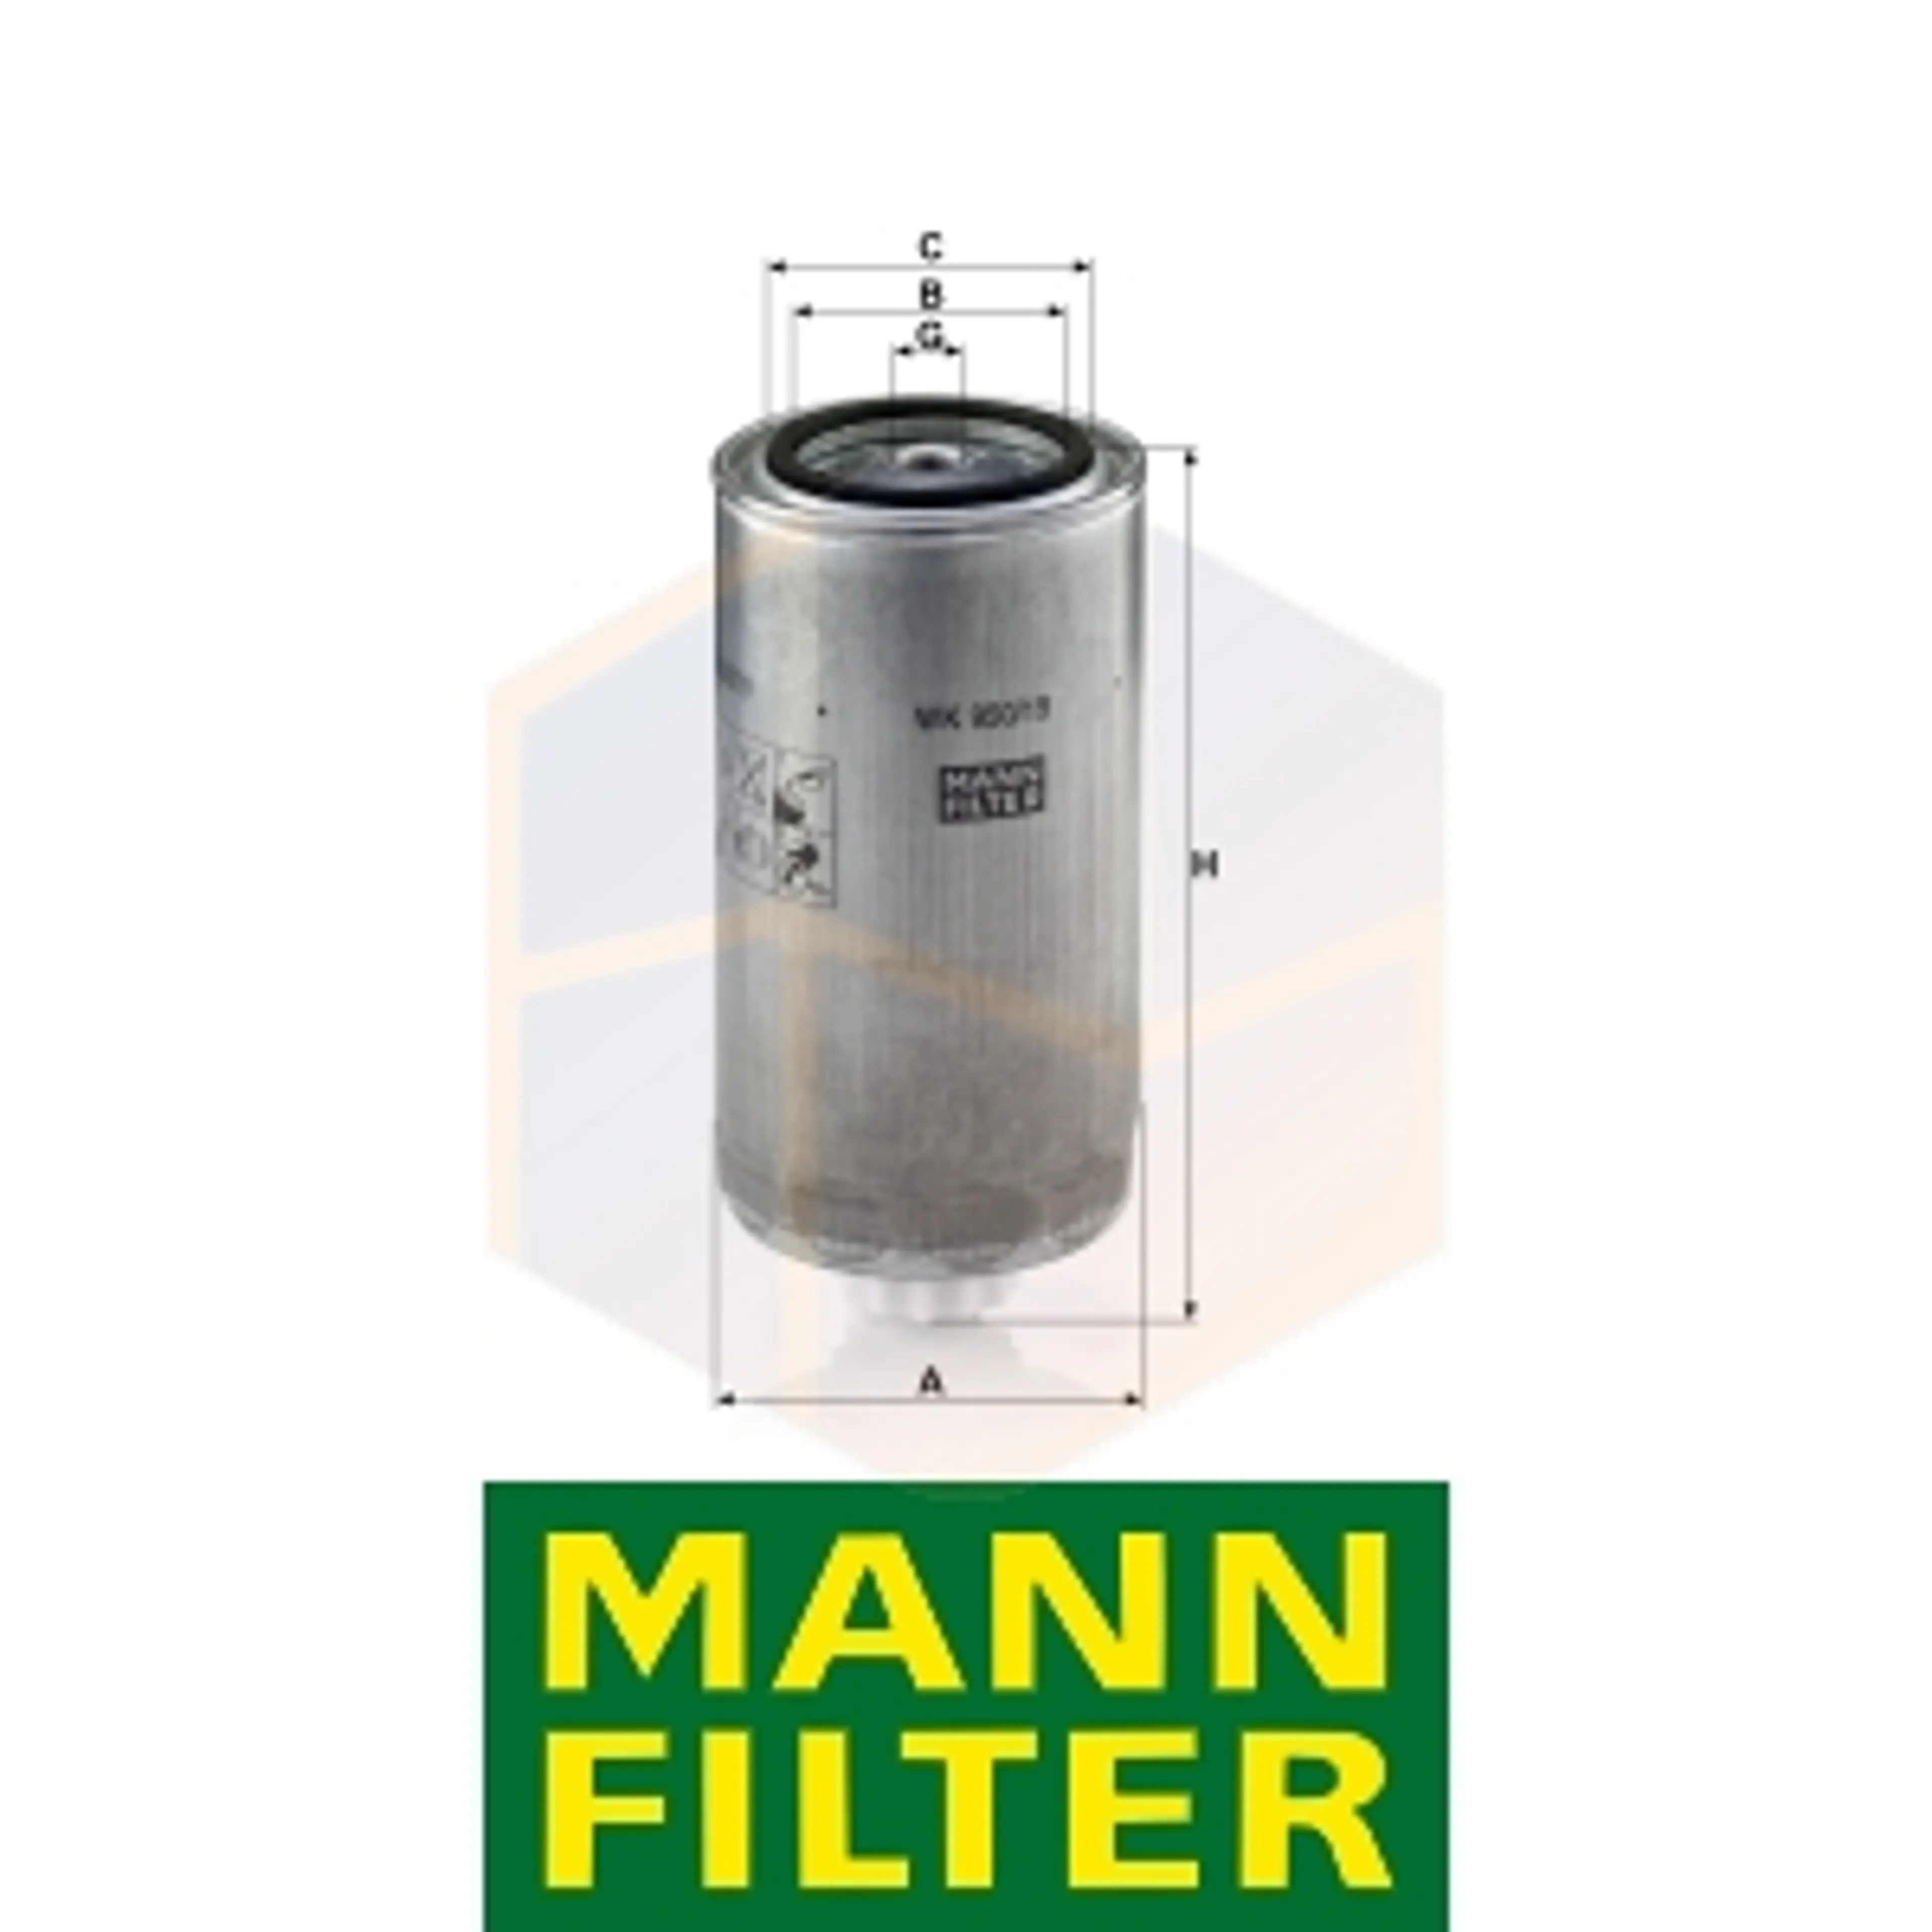 FILTRO COMBUSTIBLE WK 950/19 MANN